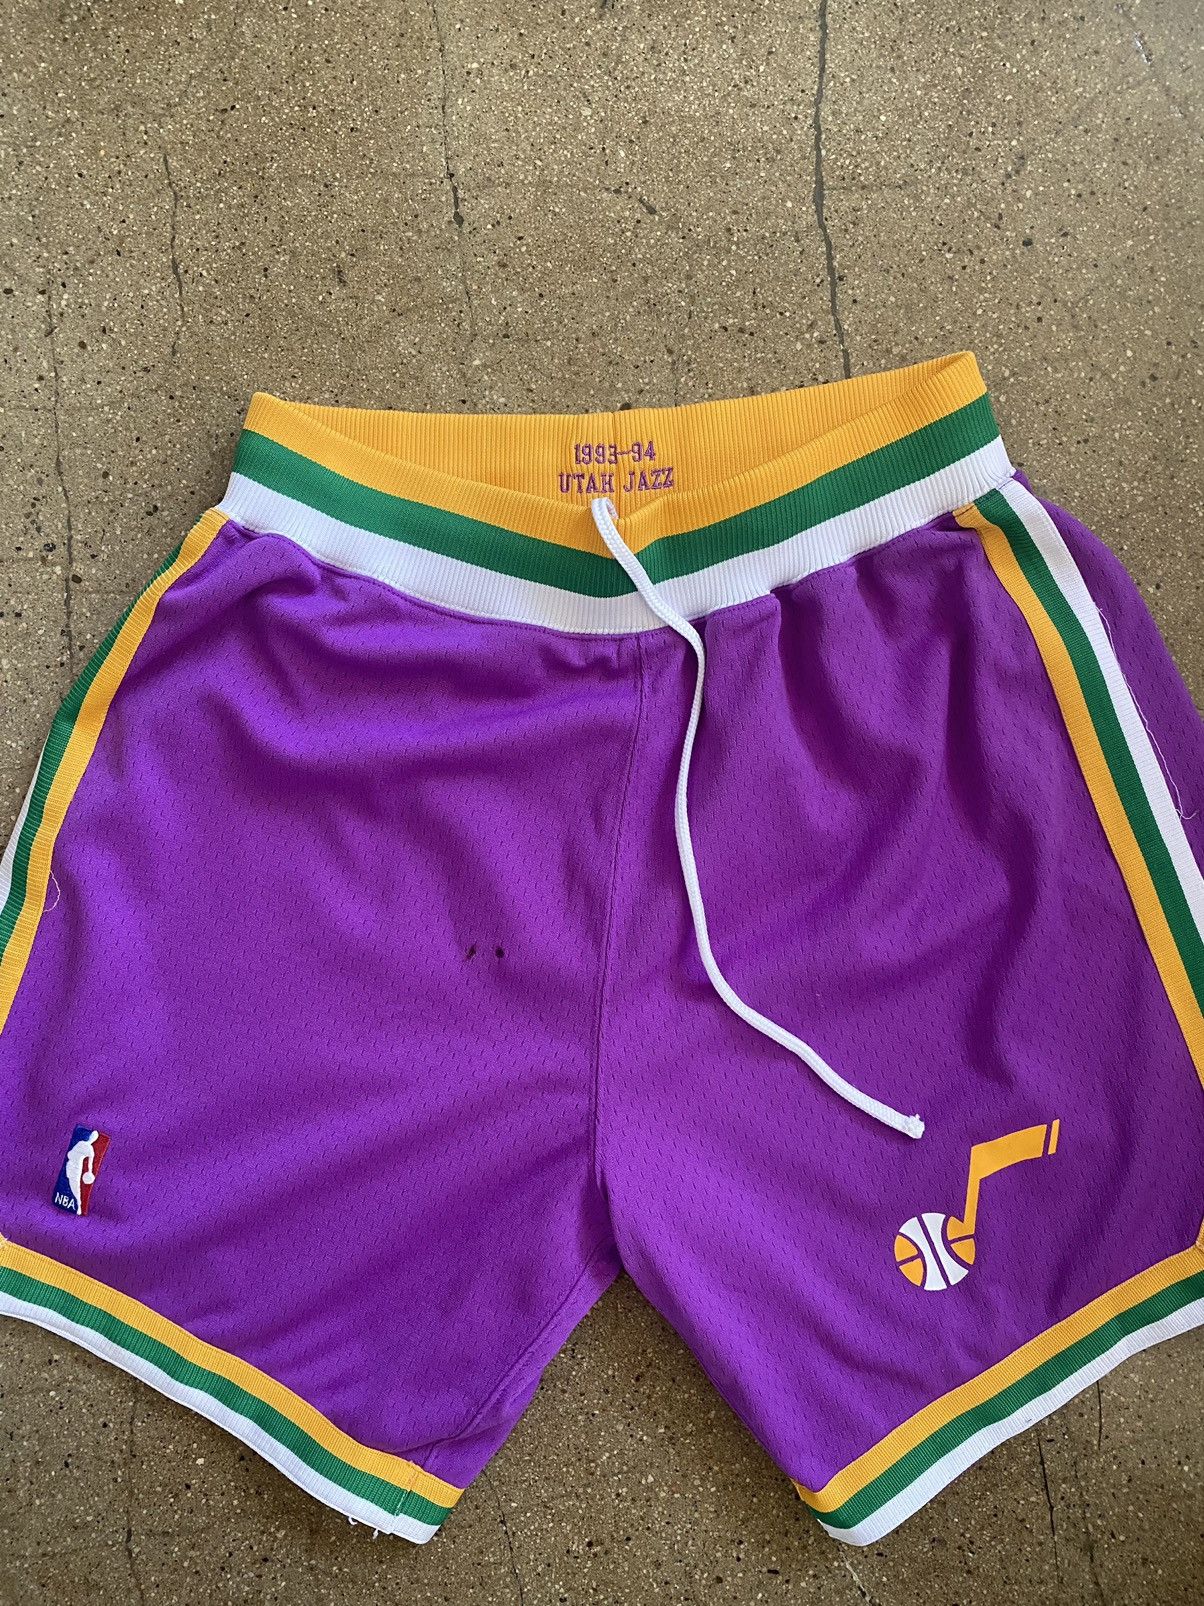 JUST DON Mitchell And Ness UTAH JAZZ 93-94 Basketball Shorts Mens SZ L Used